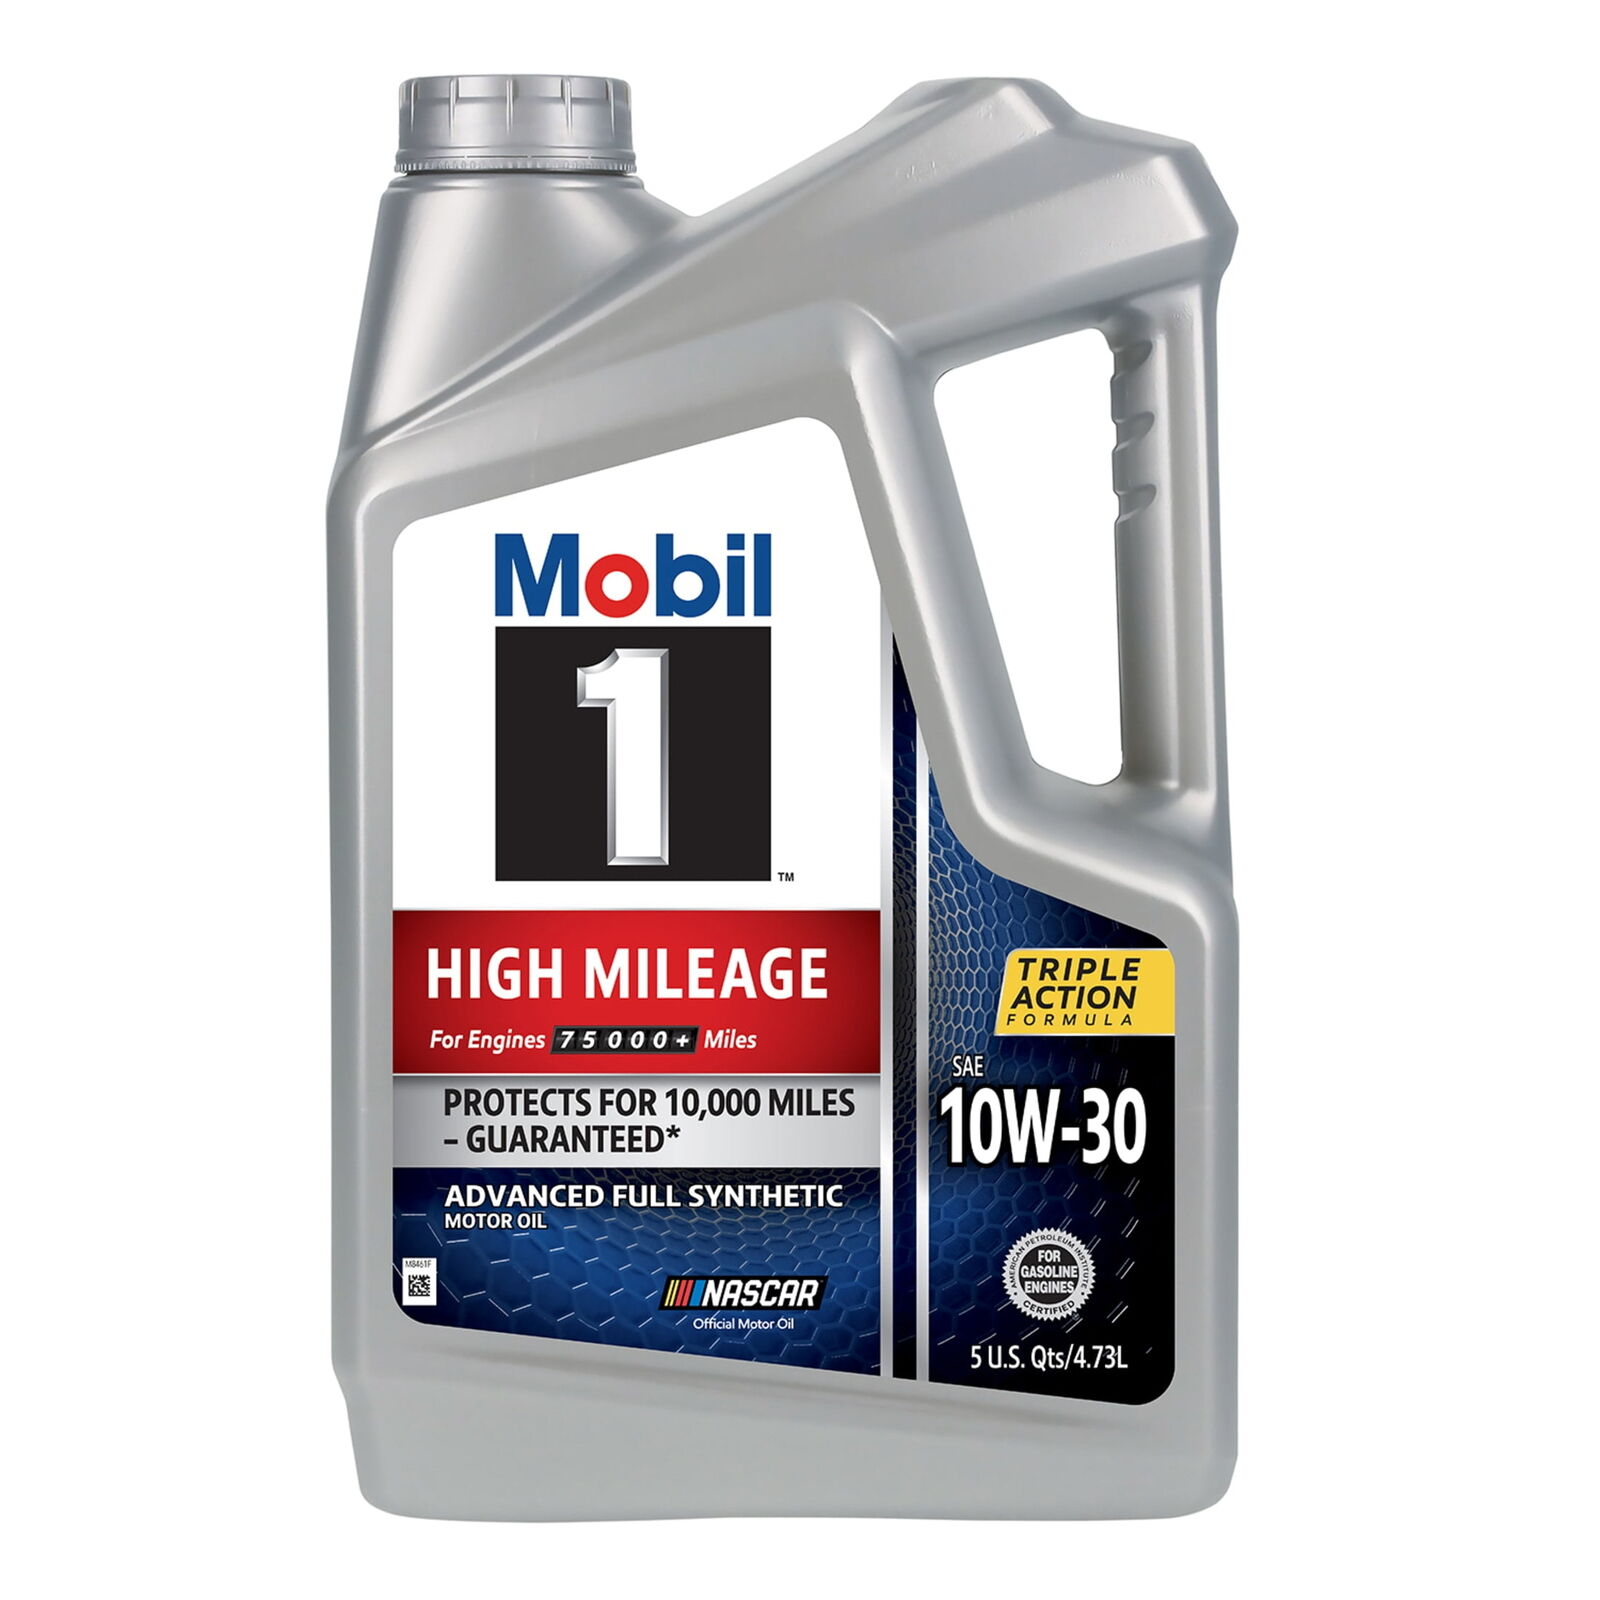 High Mileage Full Synthetic Motor Oil 10W-30, 5 Qu